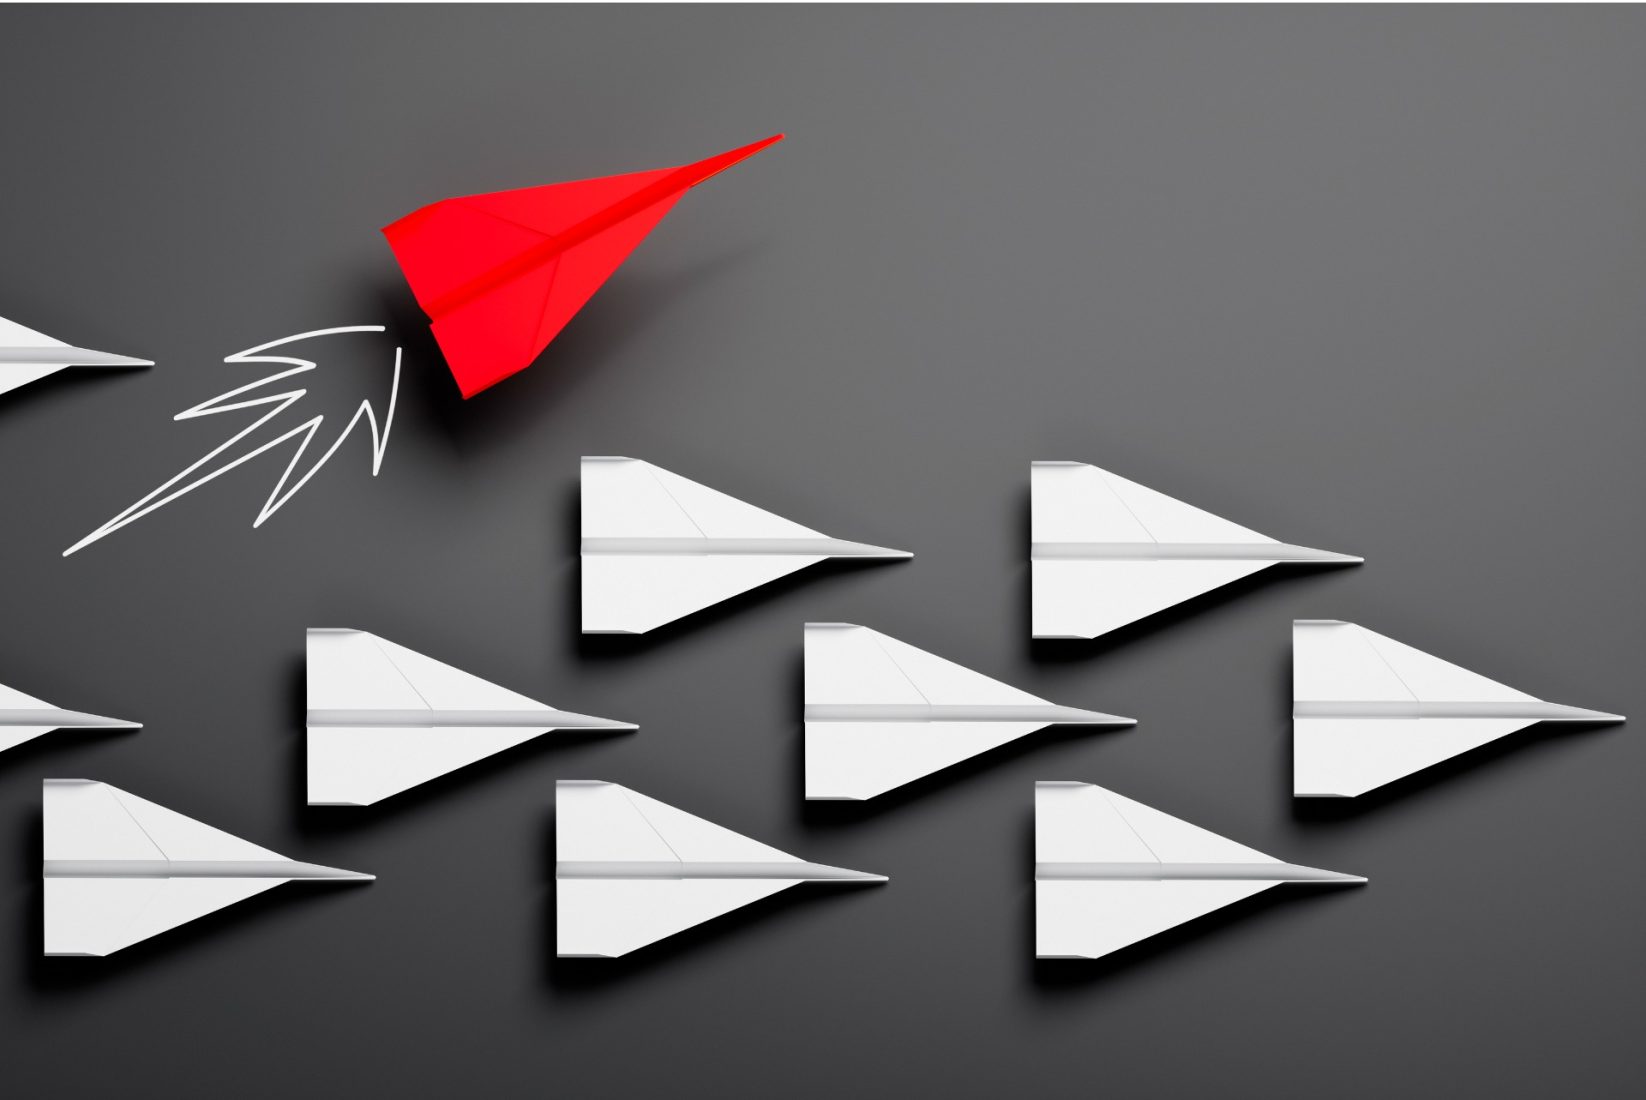 several white and one red paper aeroplane on a dark background as a symbol for competition